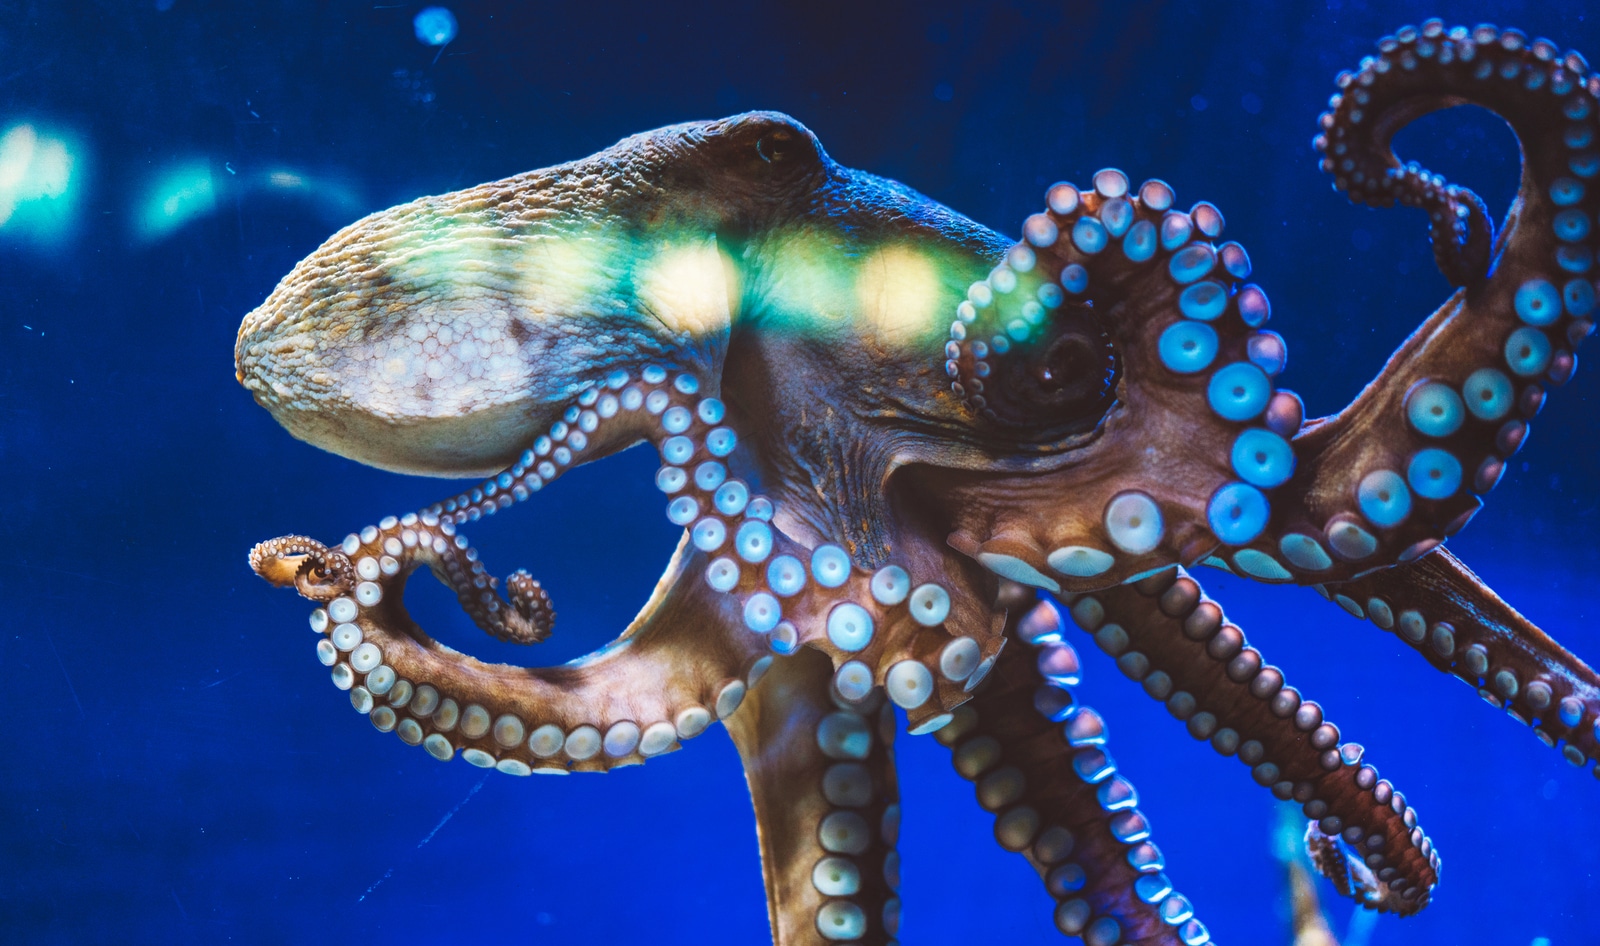 The World's First Octopus Farm Will Have a Cannibalism Problem, Report Warns